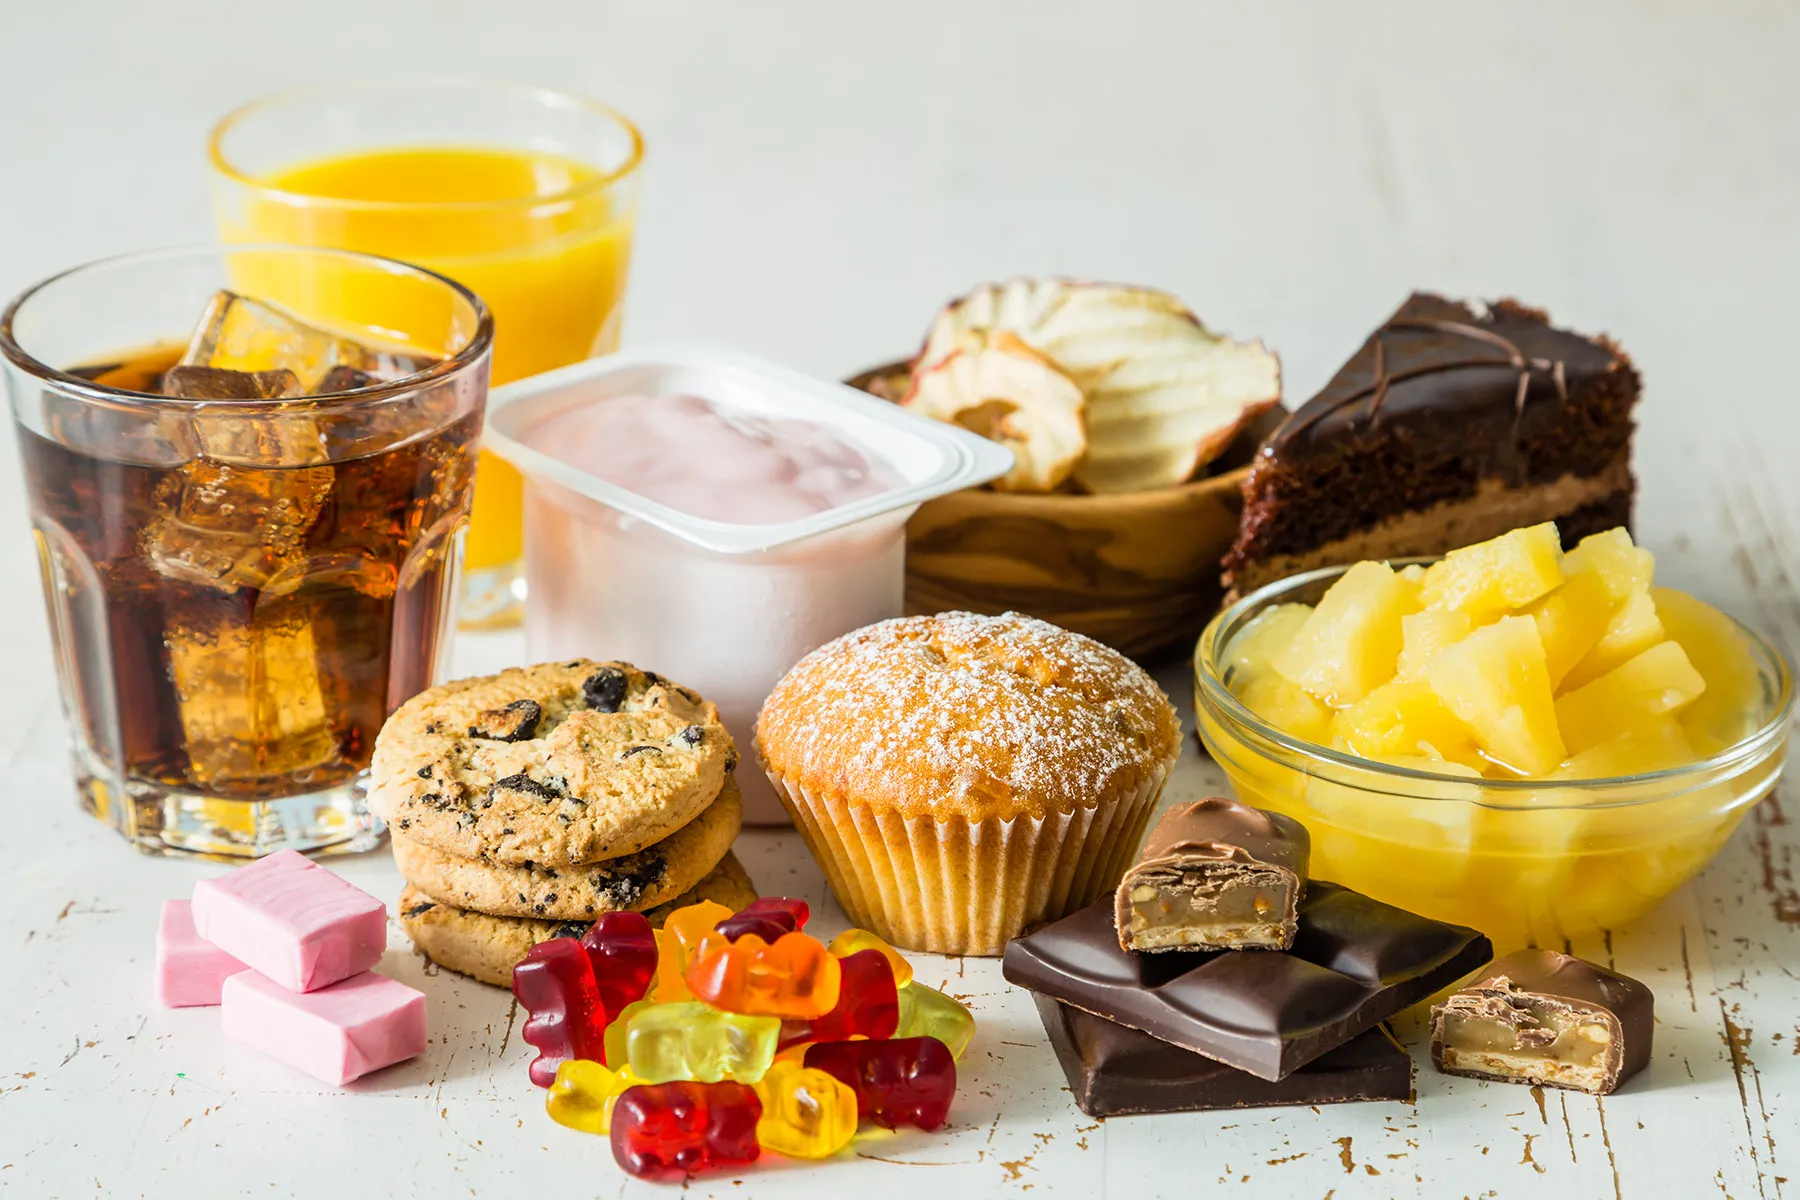 New Research Reveals Why Fat and Sugars Are Irresistible